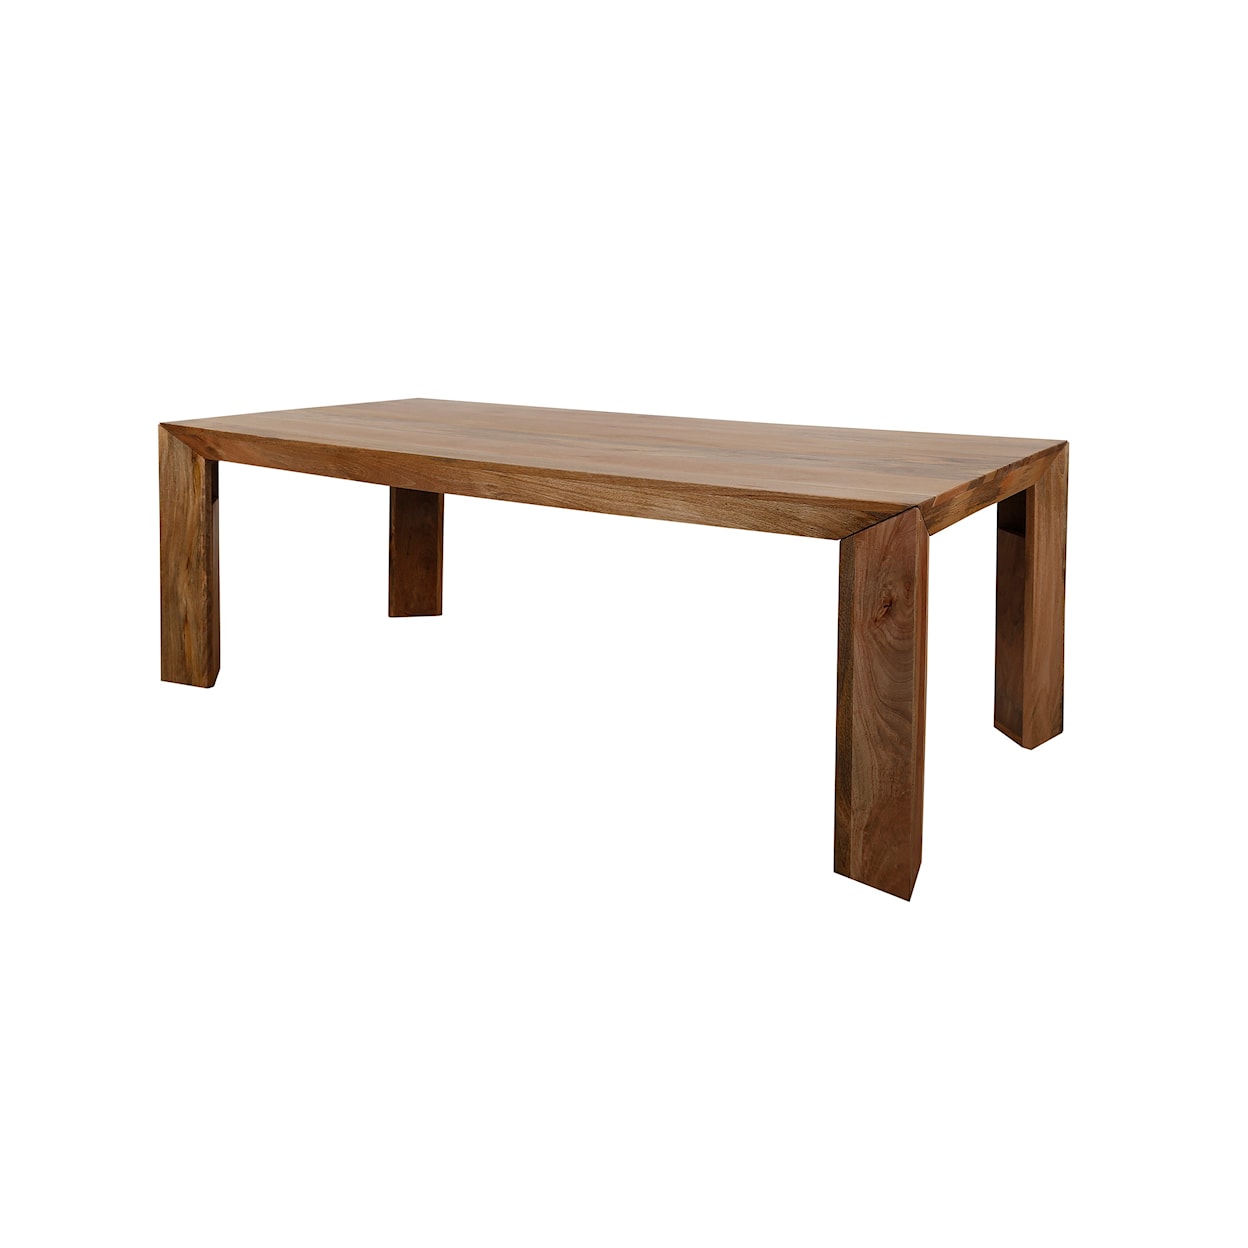 Parker House Crossings Downtown Dining Table